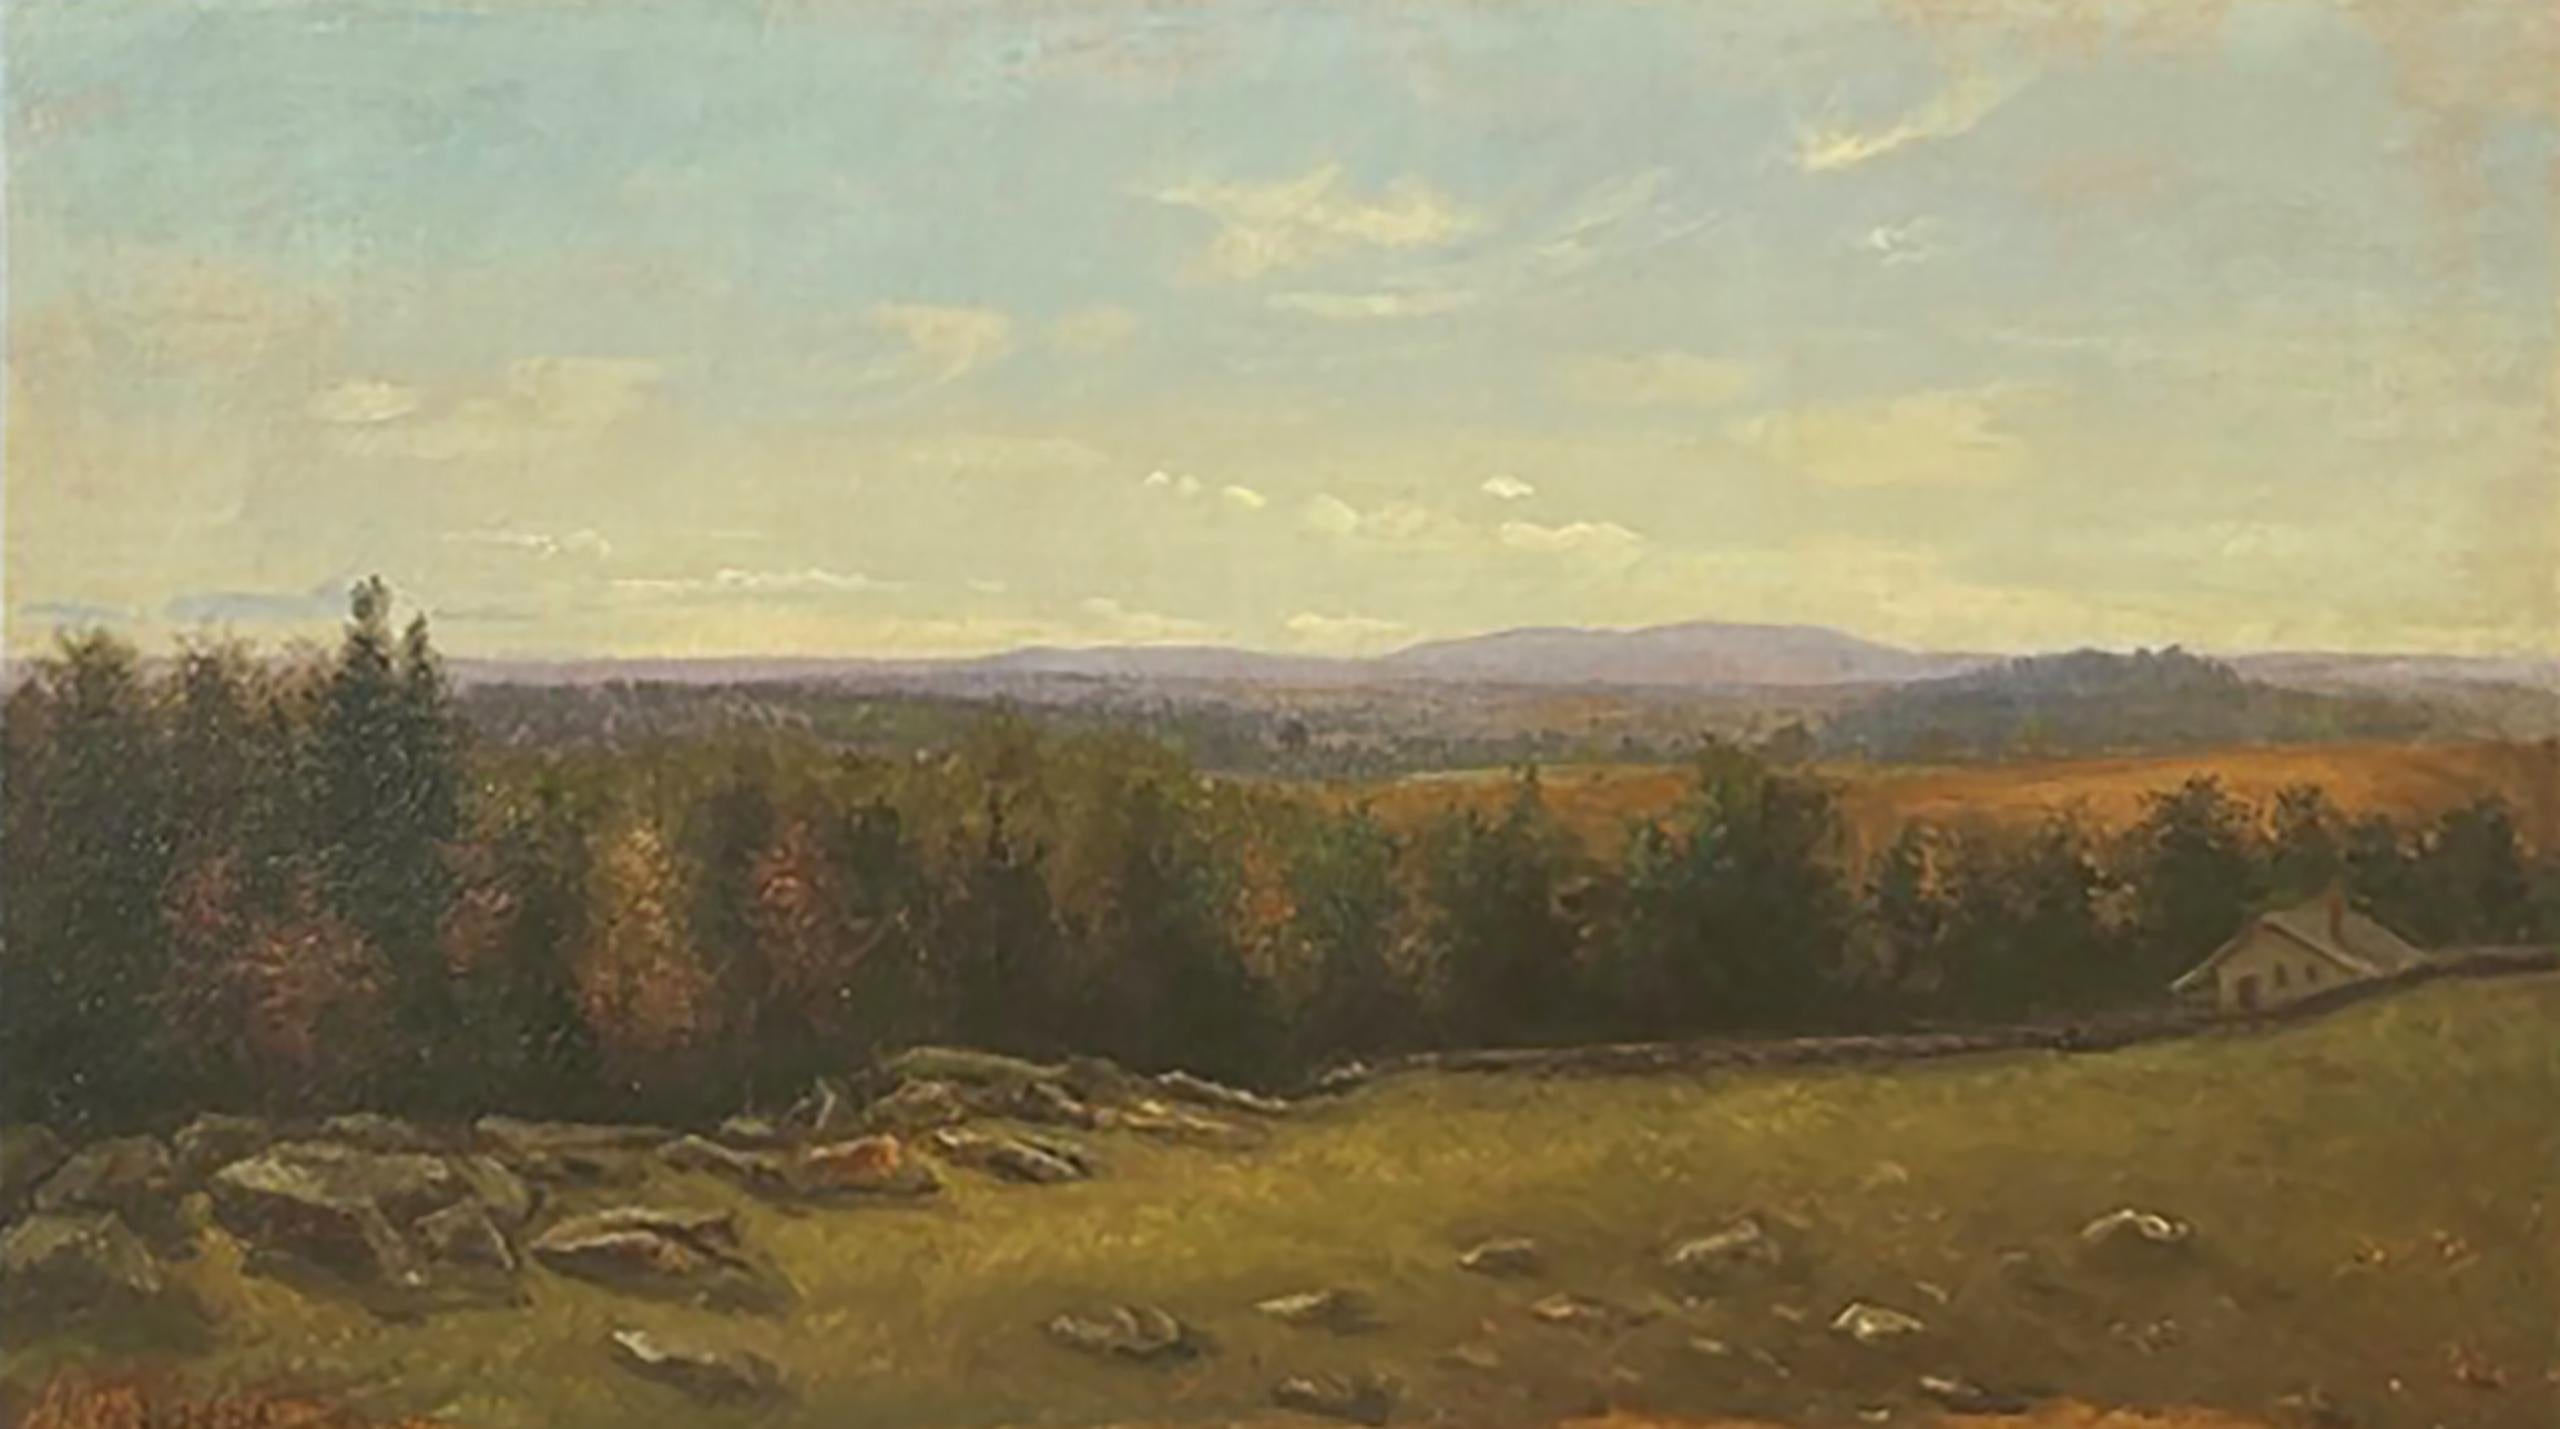 Landscape in the Hudson Valley by Worthington Whittredge (American, 1820-1910) - Painting by Thomas Worthington Whittredge